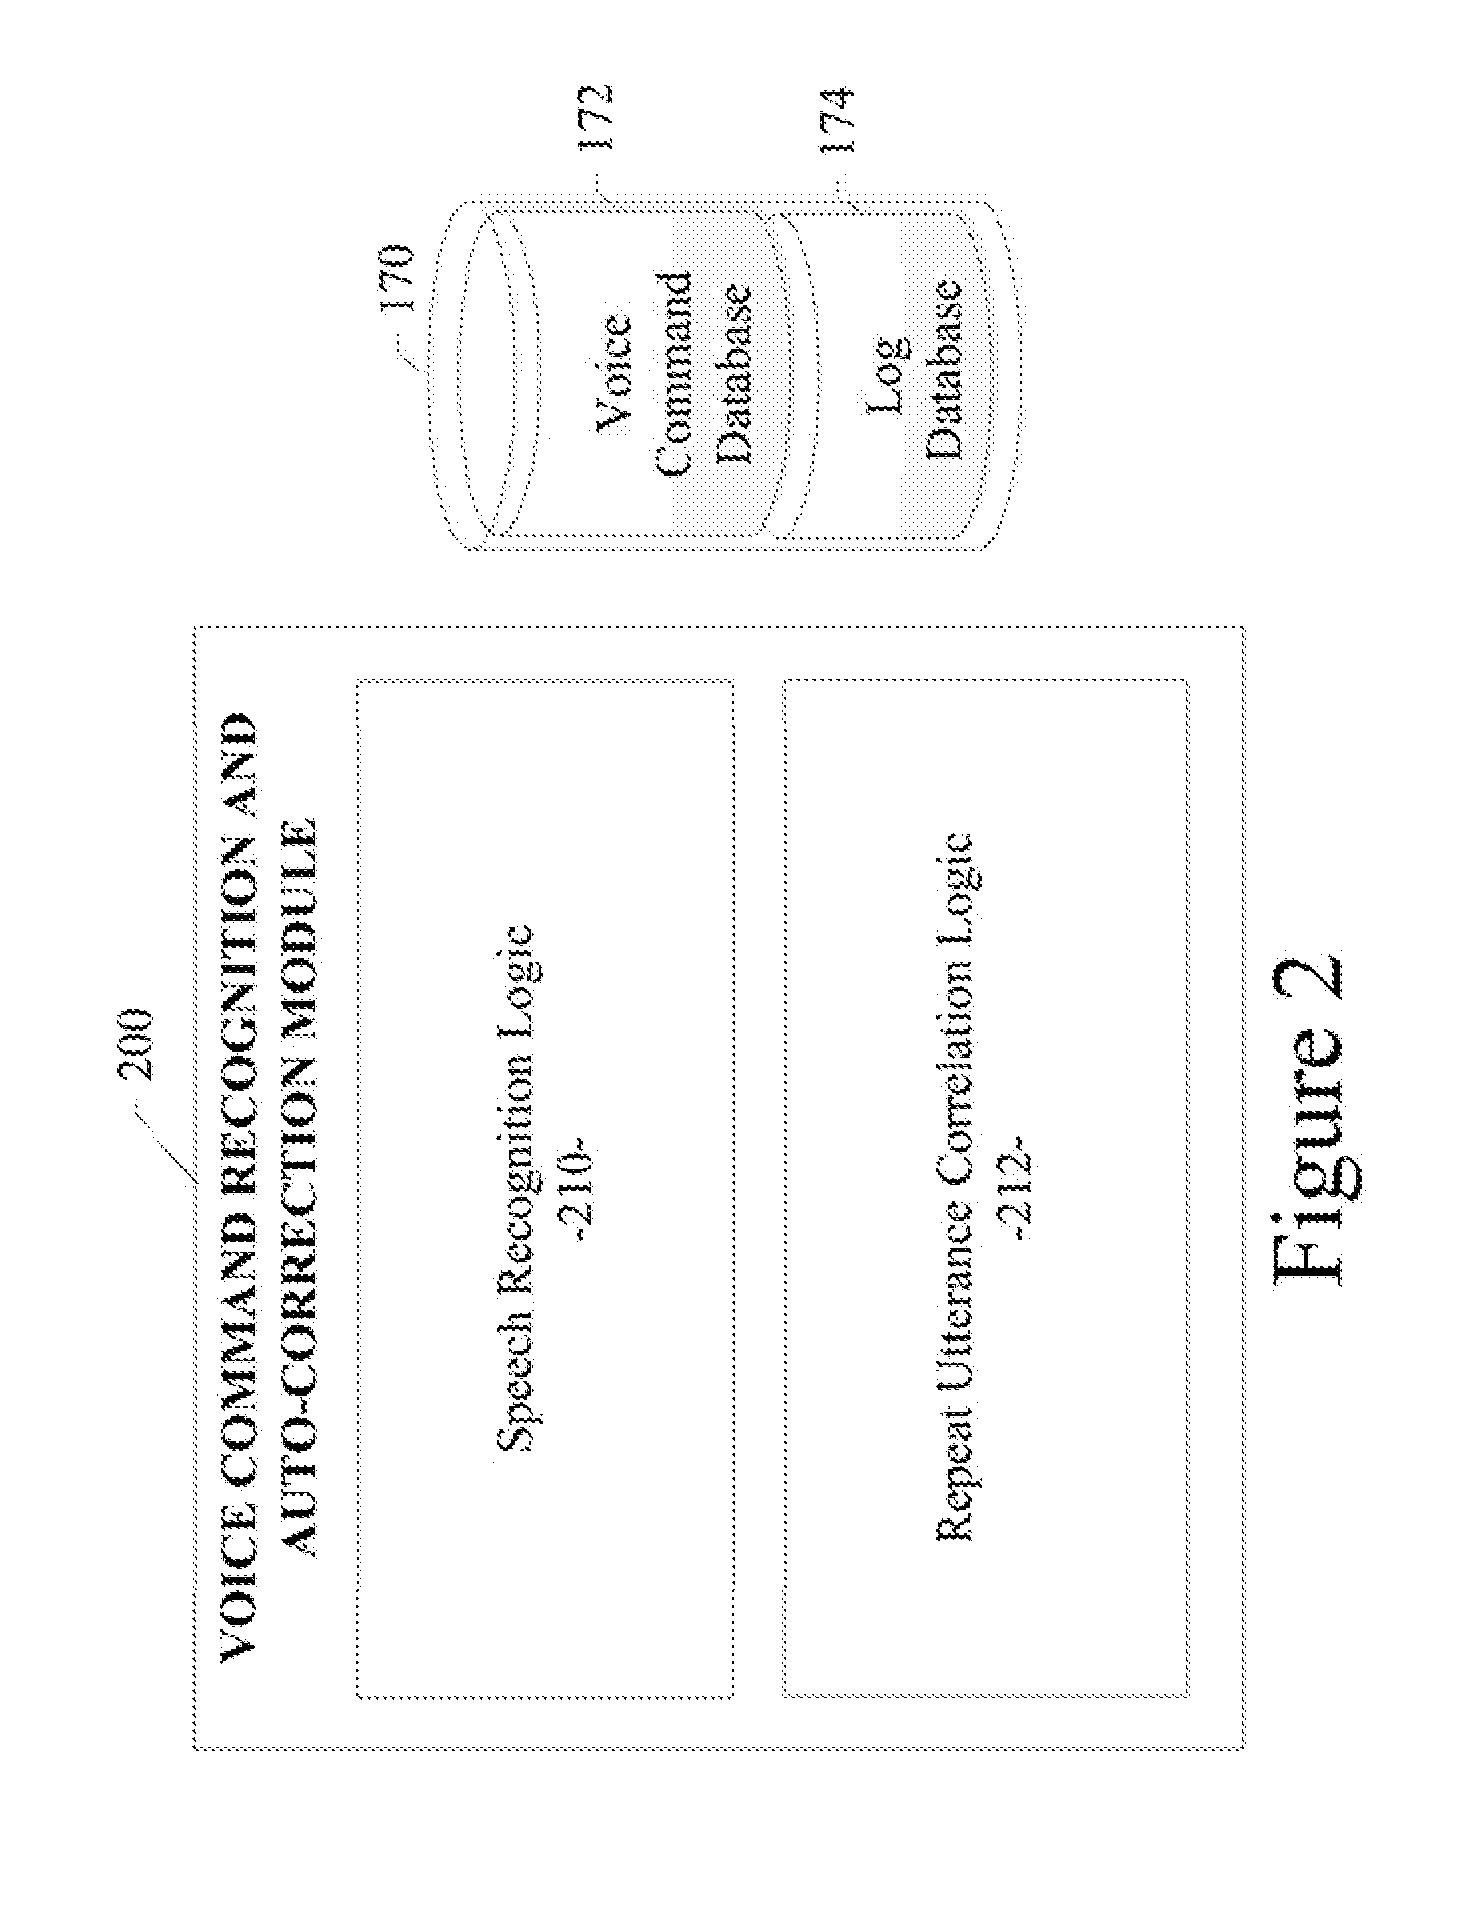 System and method for recognition and automatic correction of voice commands